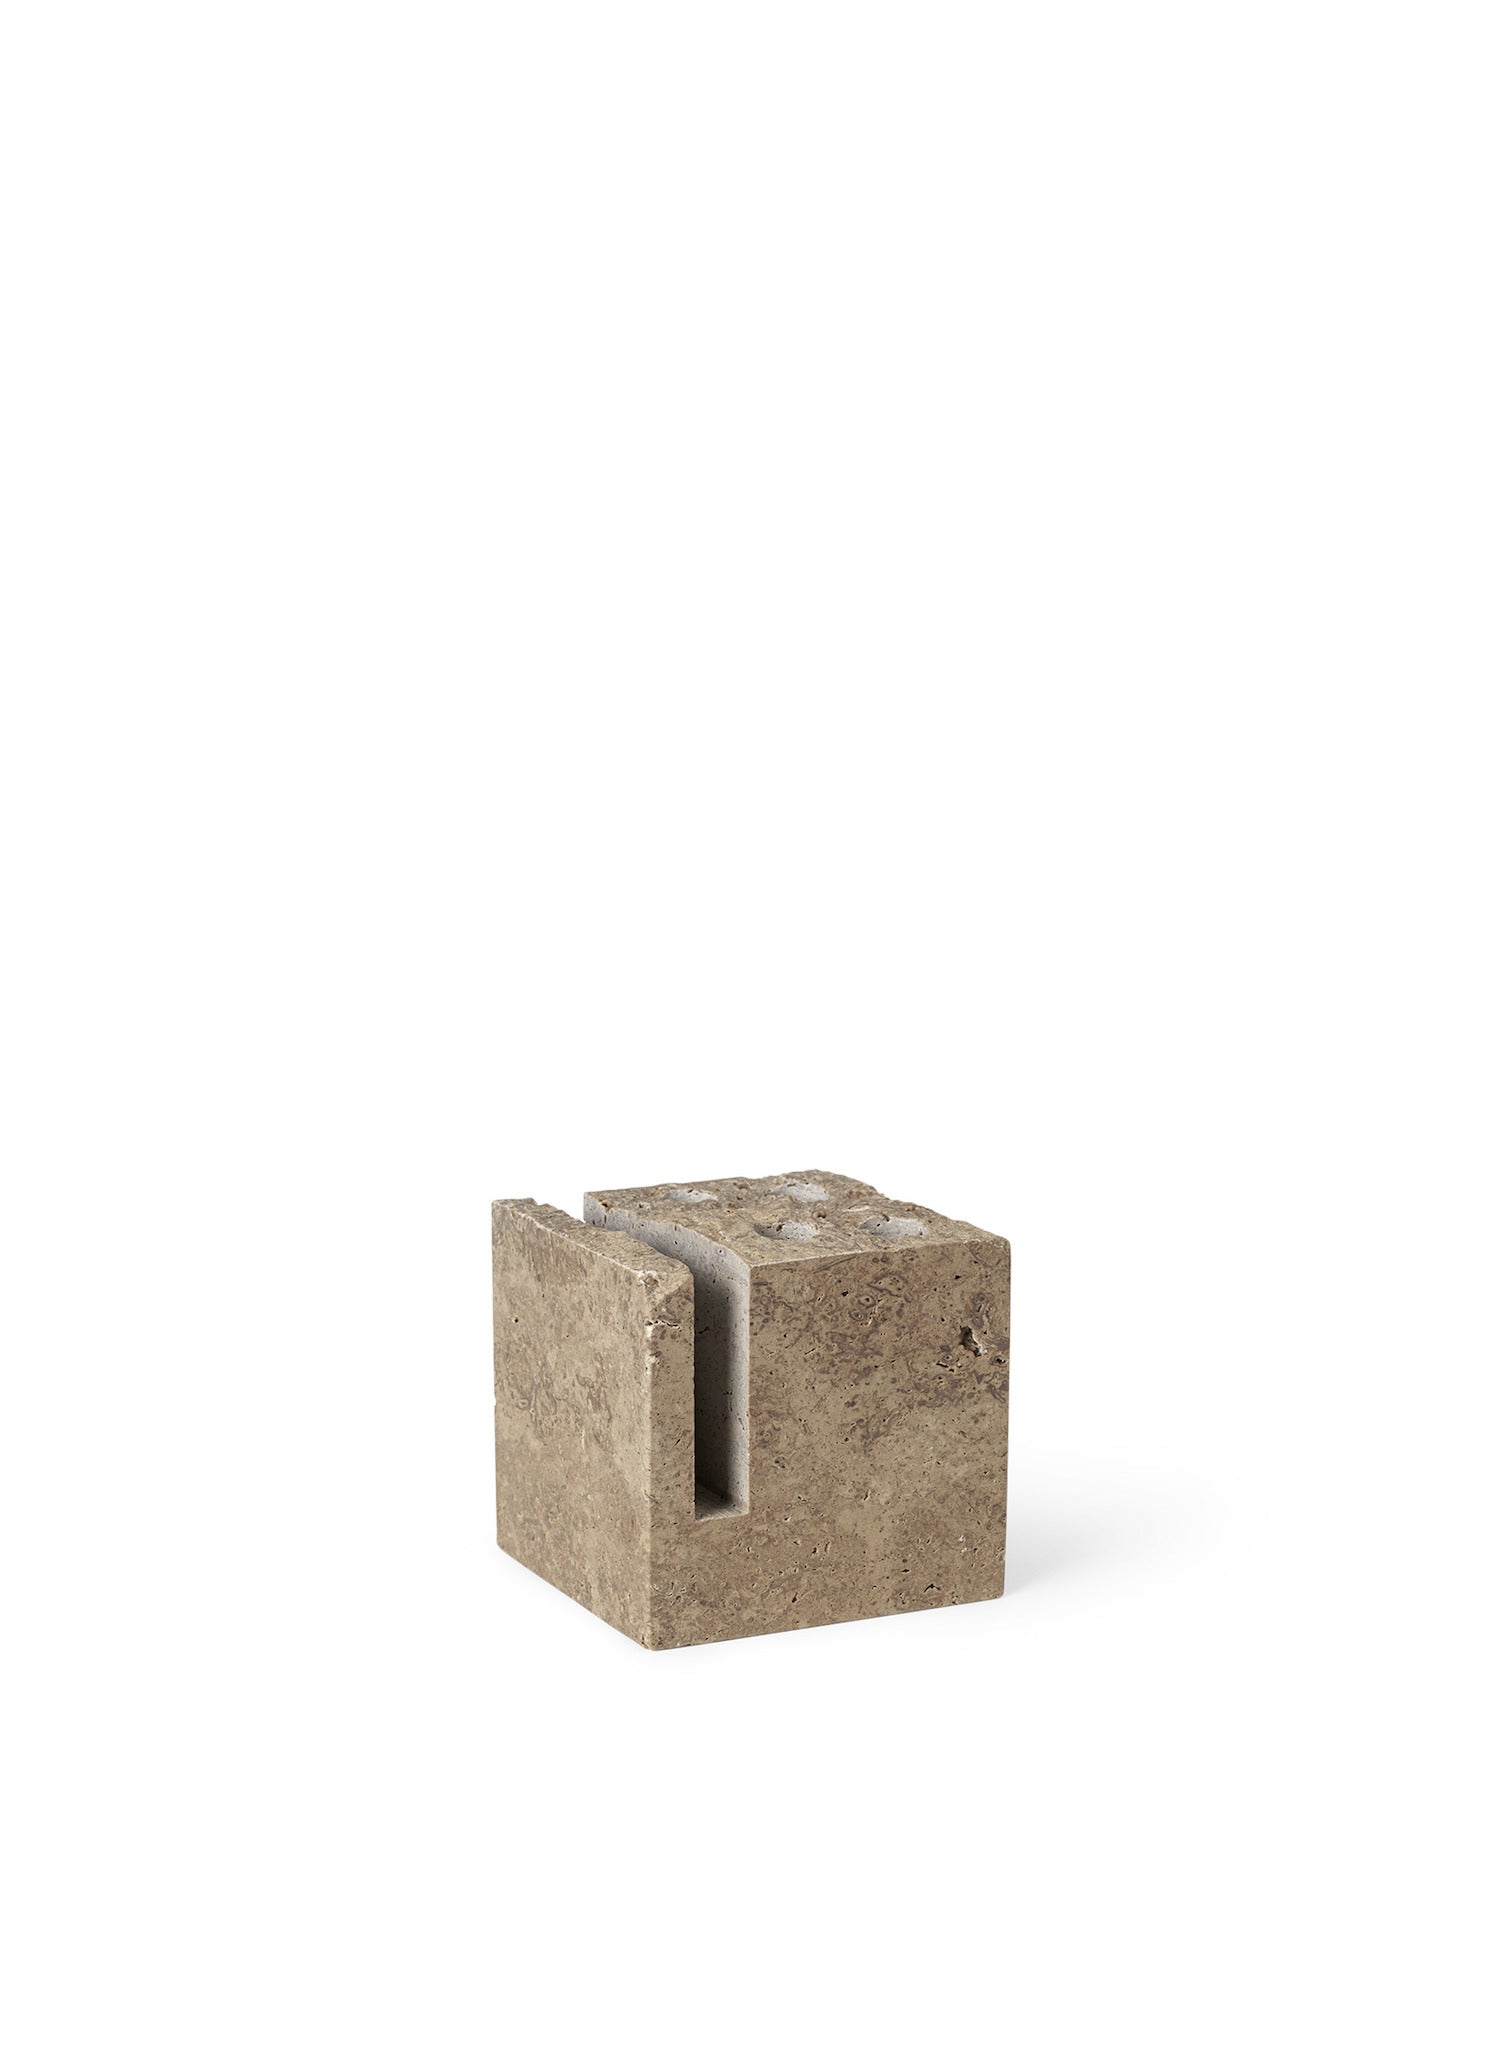 Klint Pencil Holder. An elevated, sculptural pencil holder made entirely from travertine stone with a rough, unpolished surface.